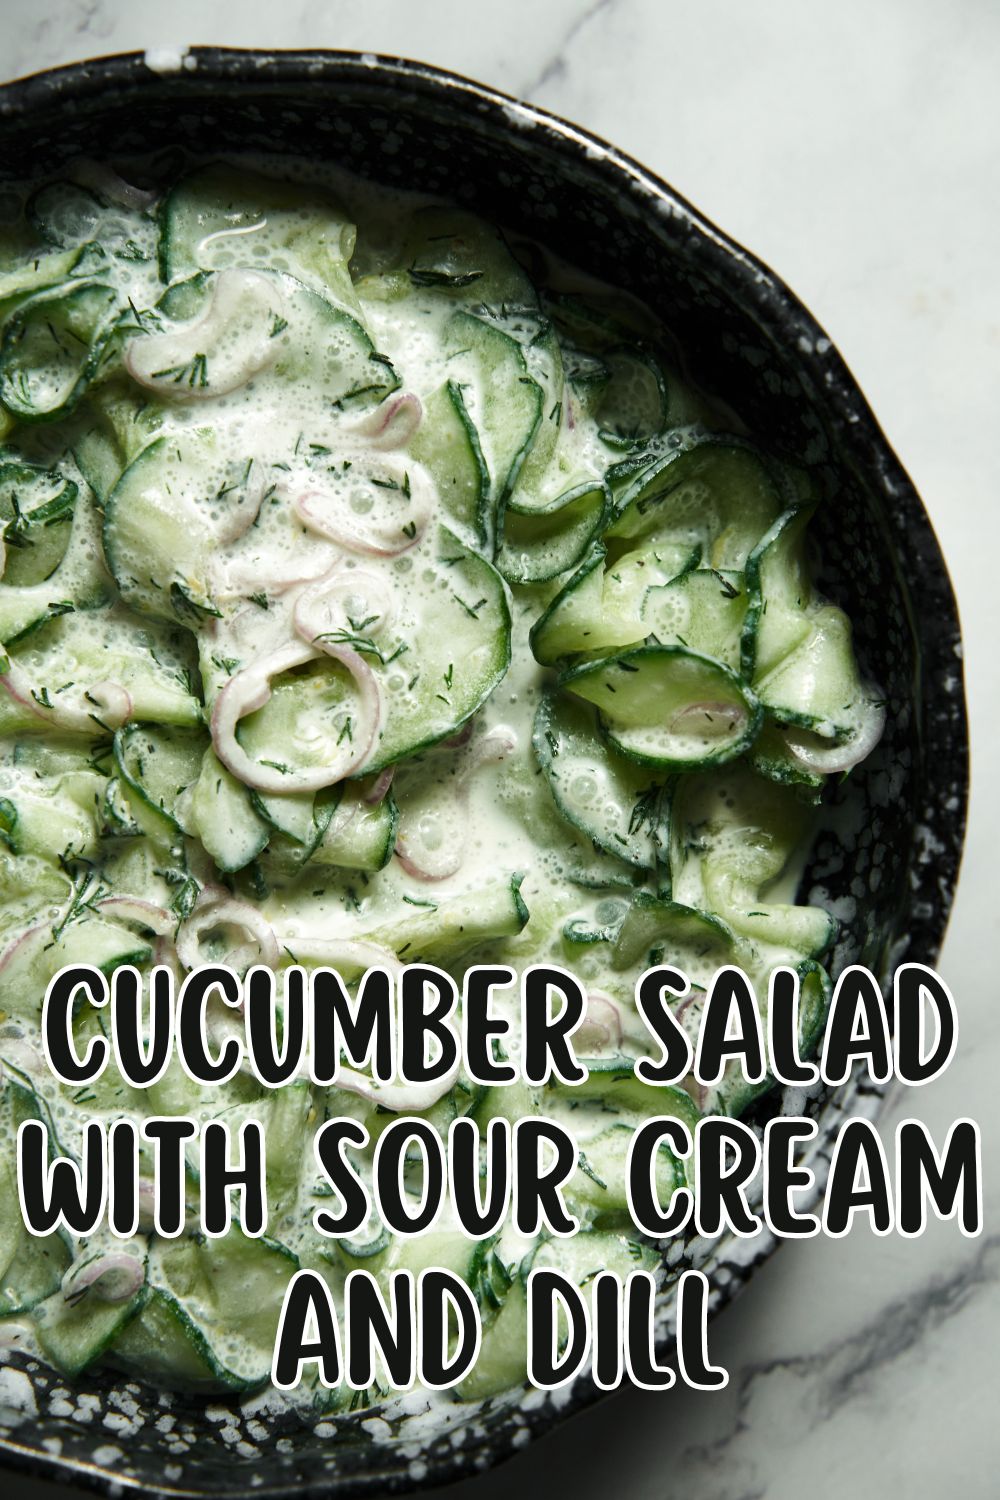 Cucumber salad with sour cream and dill.